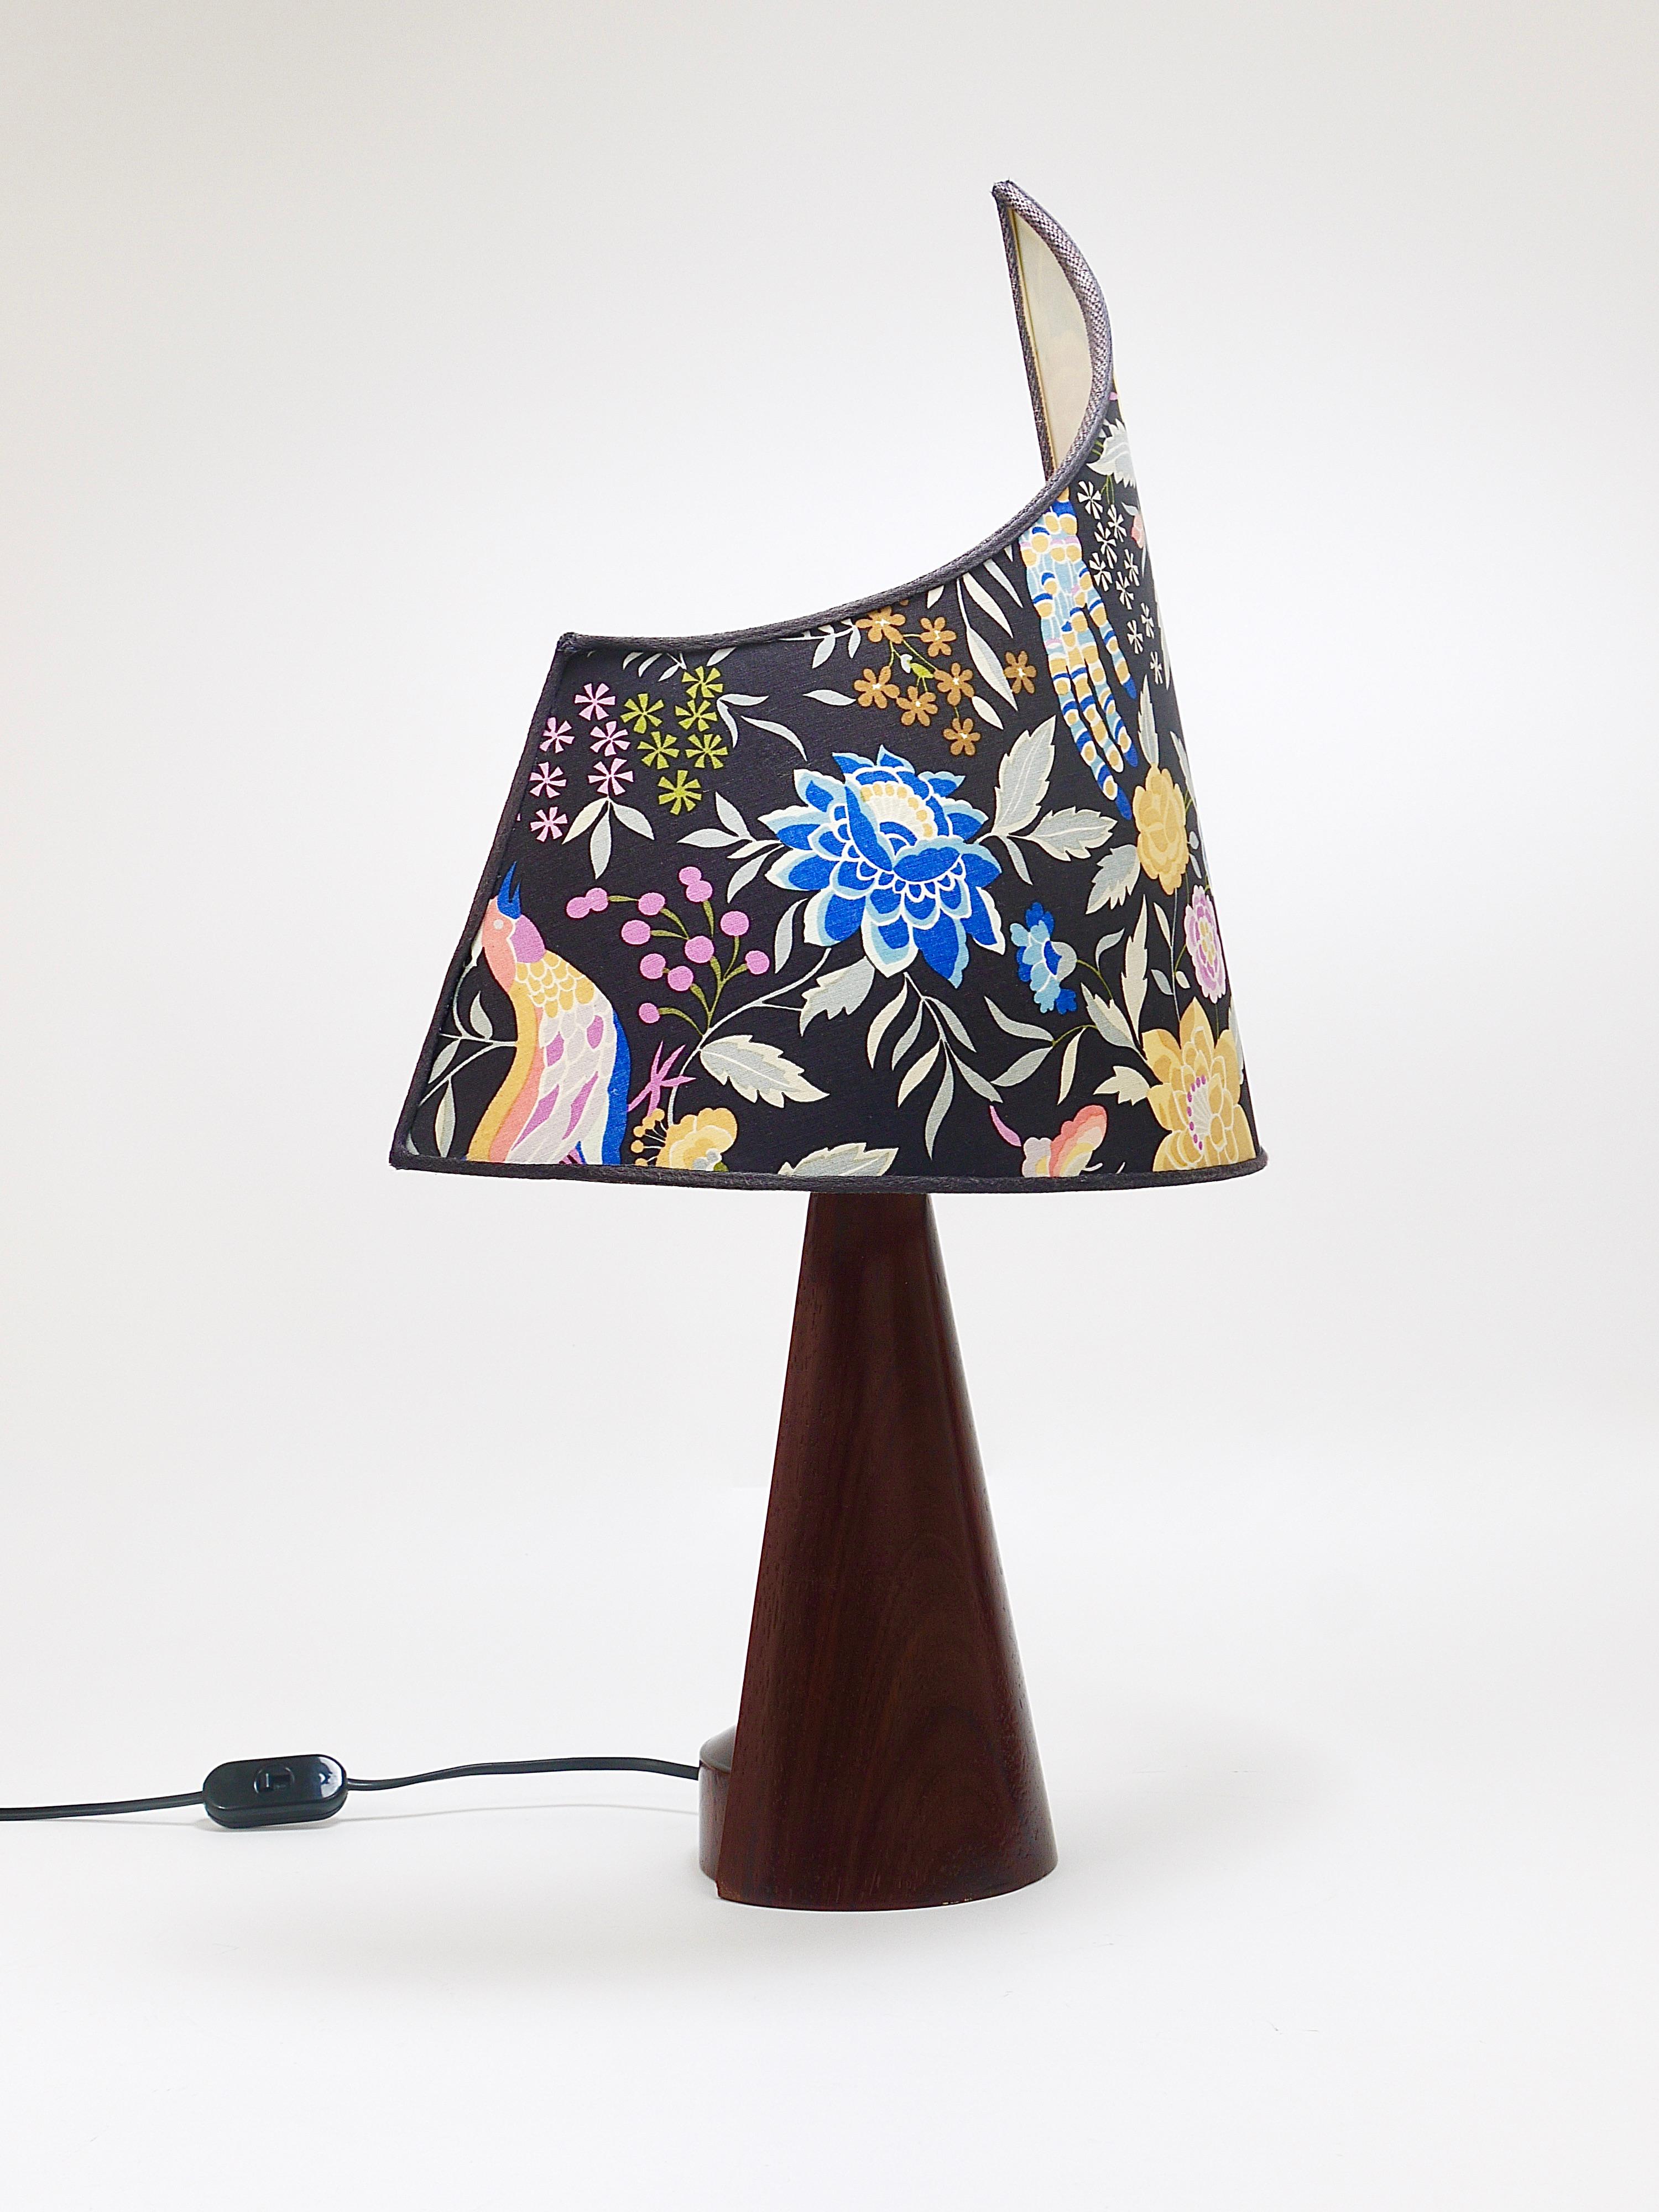 A Pair Missoni Post-Modern Table Side Lamps by Massimo Valloto, Italy, 1980s For Sale 3